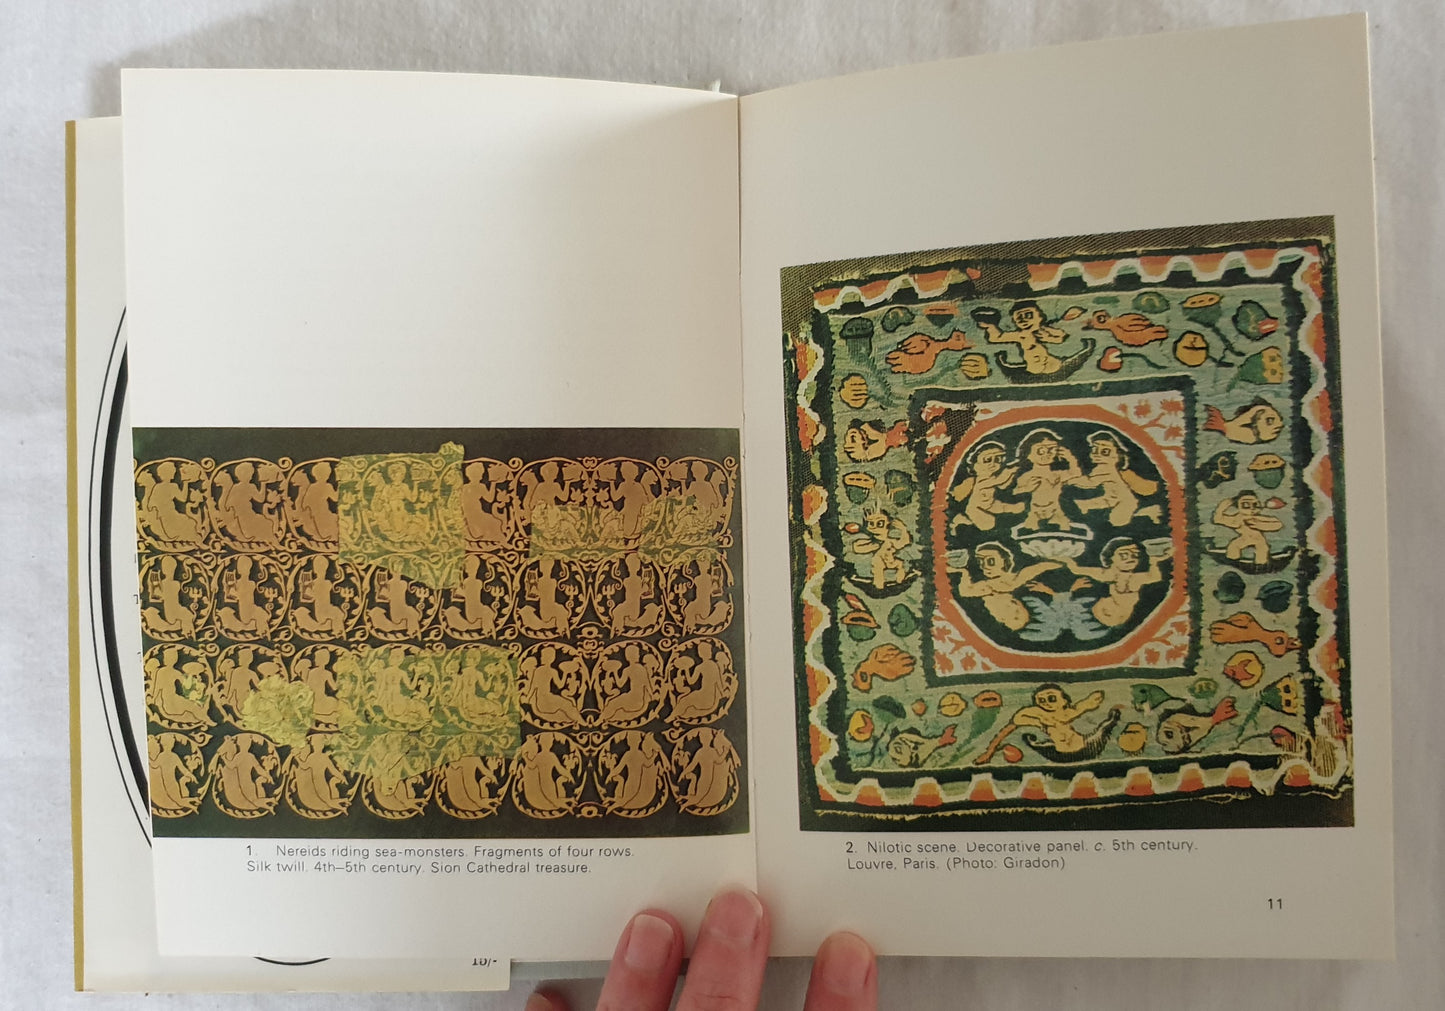 Early Decorative Textiles by W. Fritz Volbach